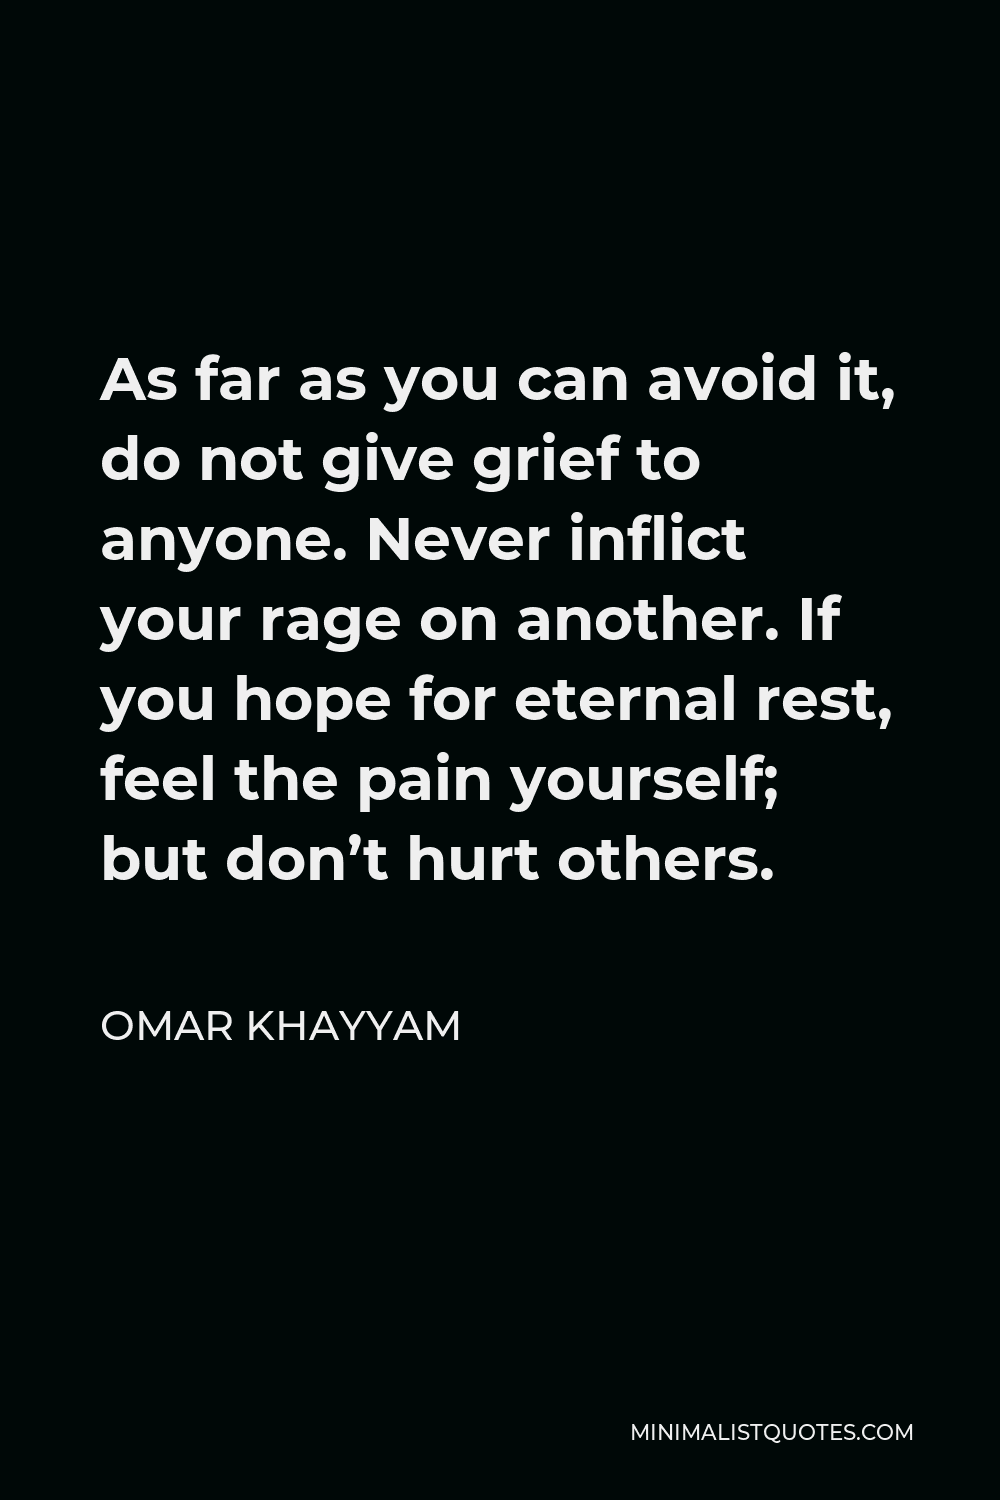 Omar Khayyam Quote - As far as you can avoid it, do not give grief to anyone. Never inflict your rage on another. If you hope for eternal rest, feel the pain yourself; but don’t hurt others.